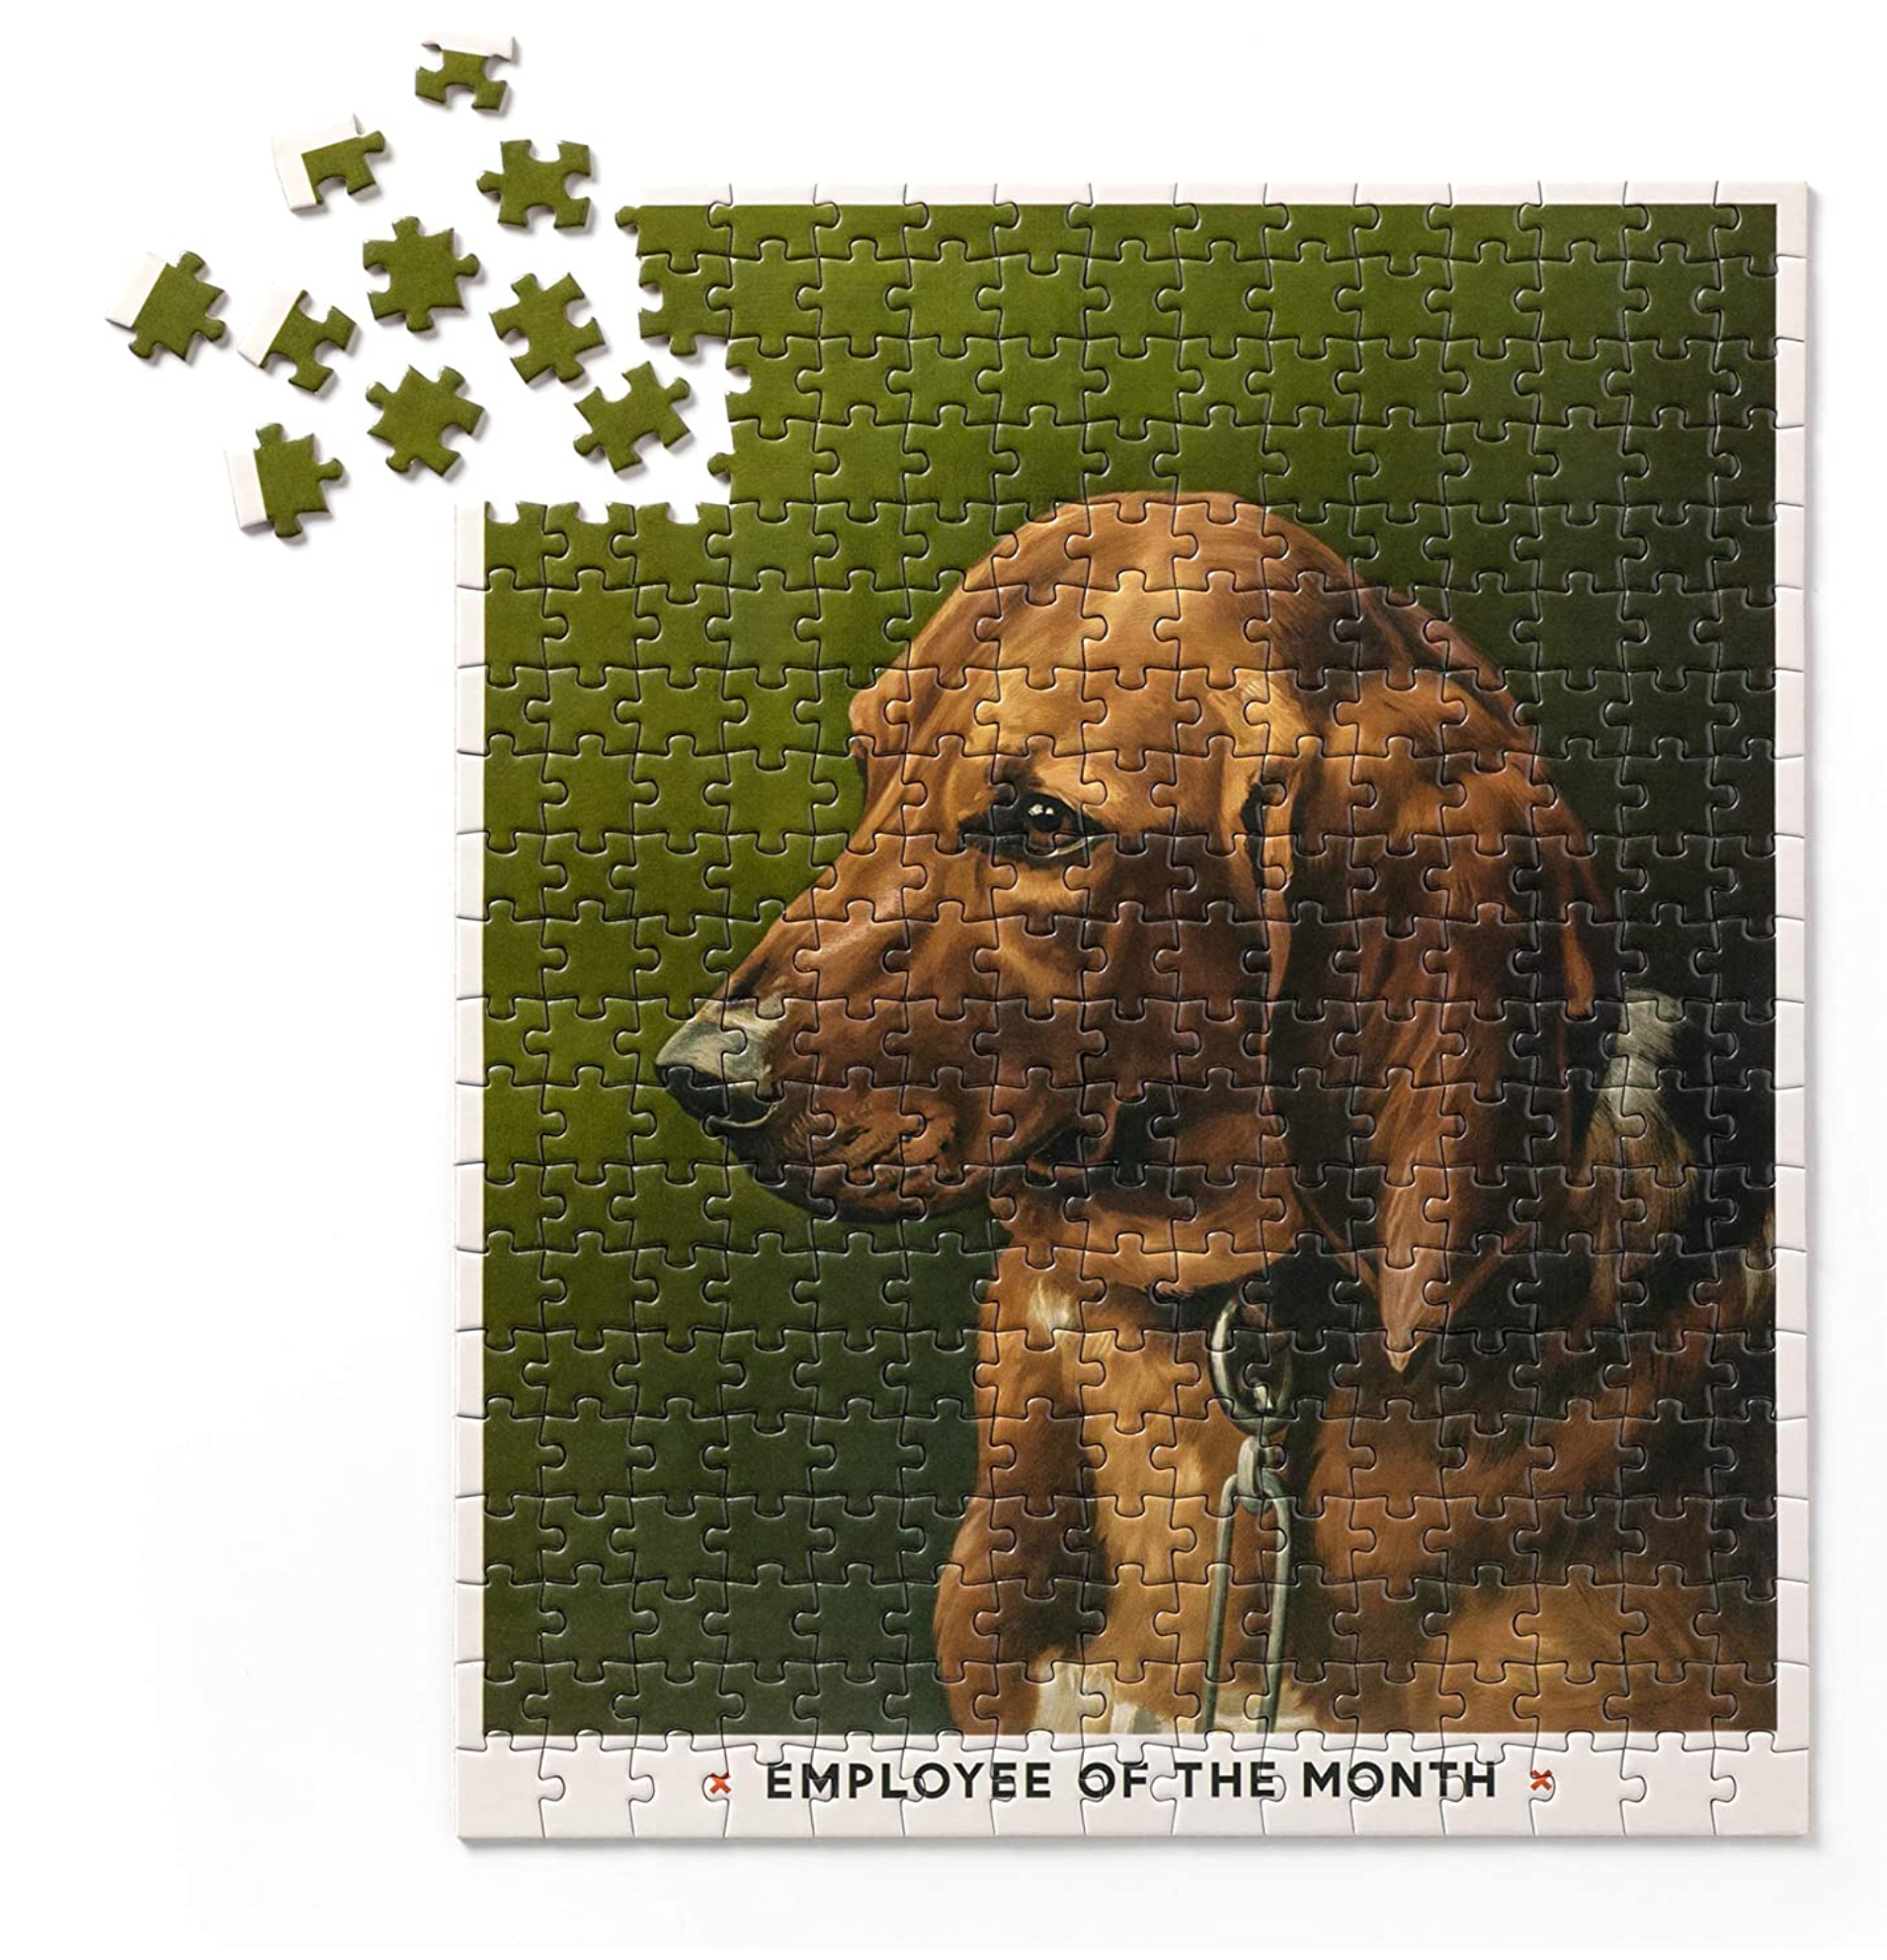 Puzzlove Dogs